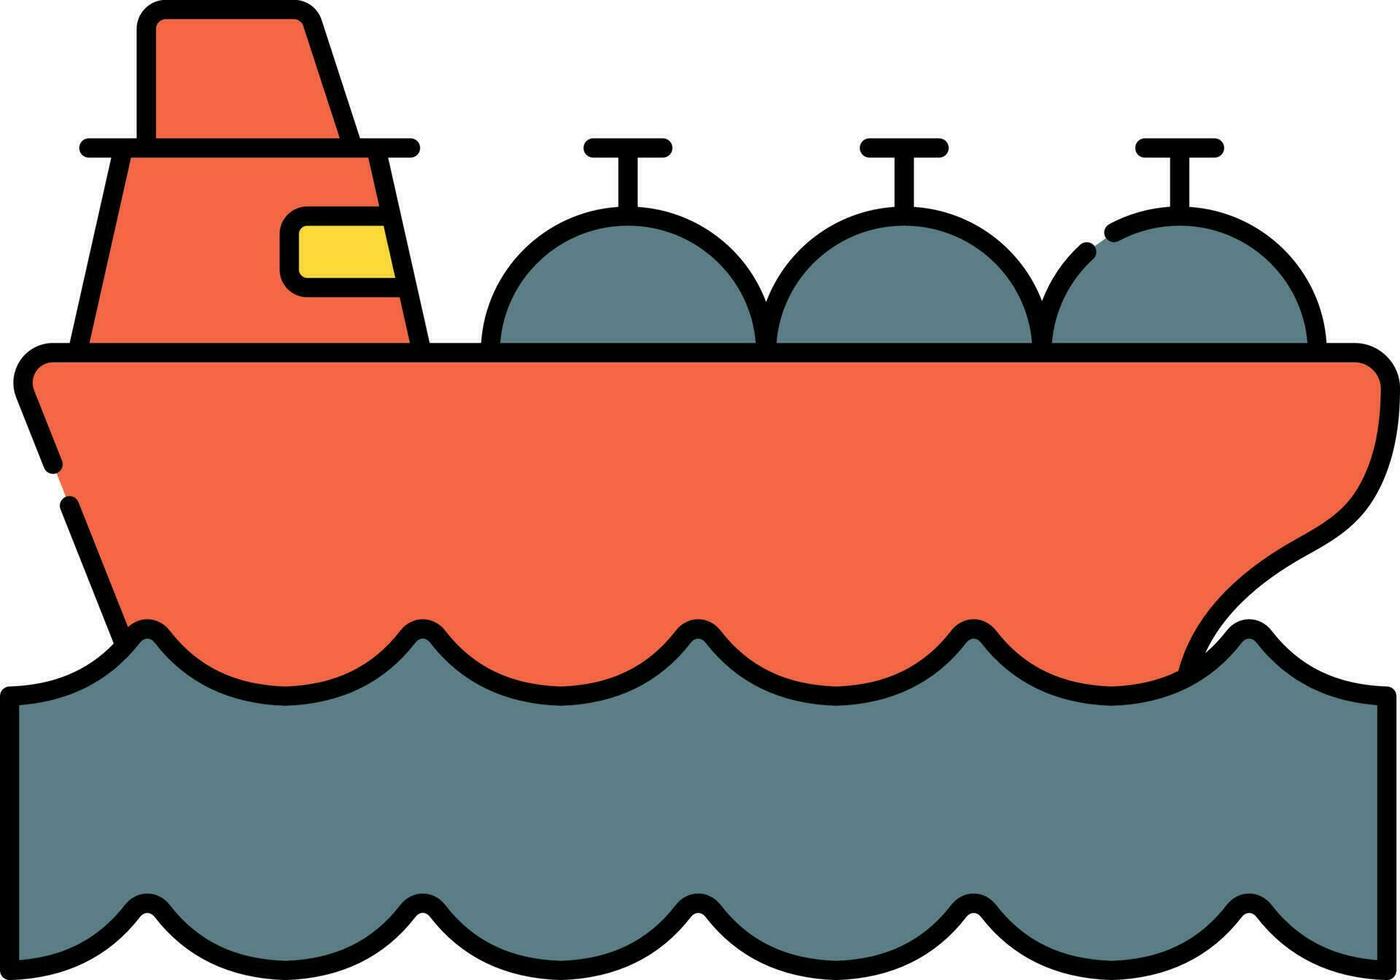 Oil Tanker Ship Flat Icon In Orange And Teal Color. vector